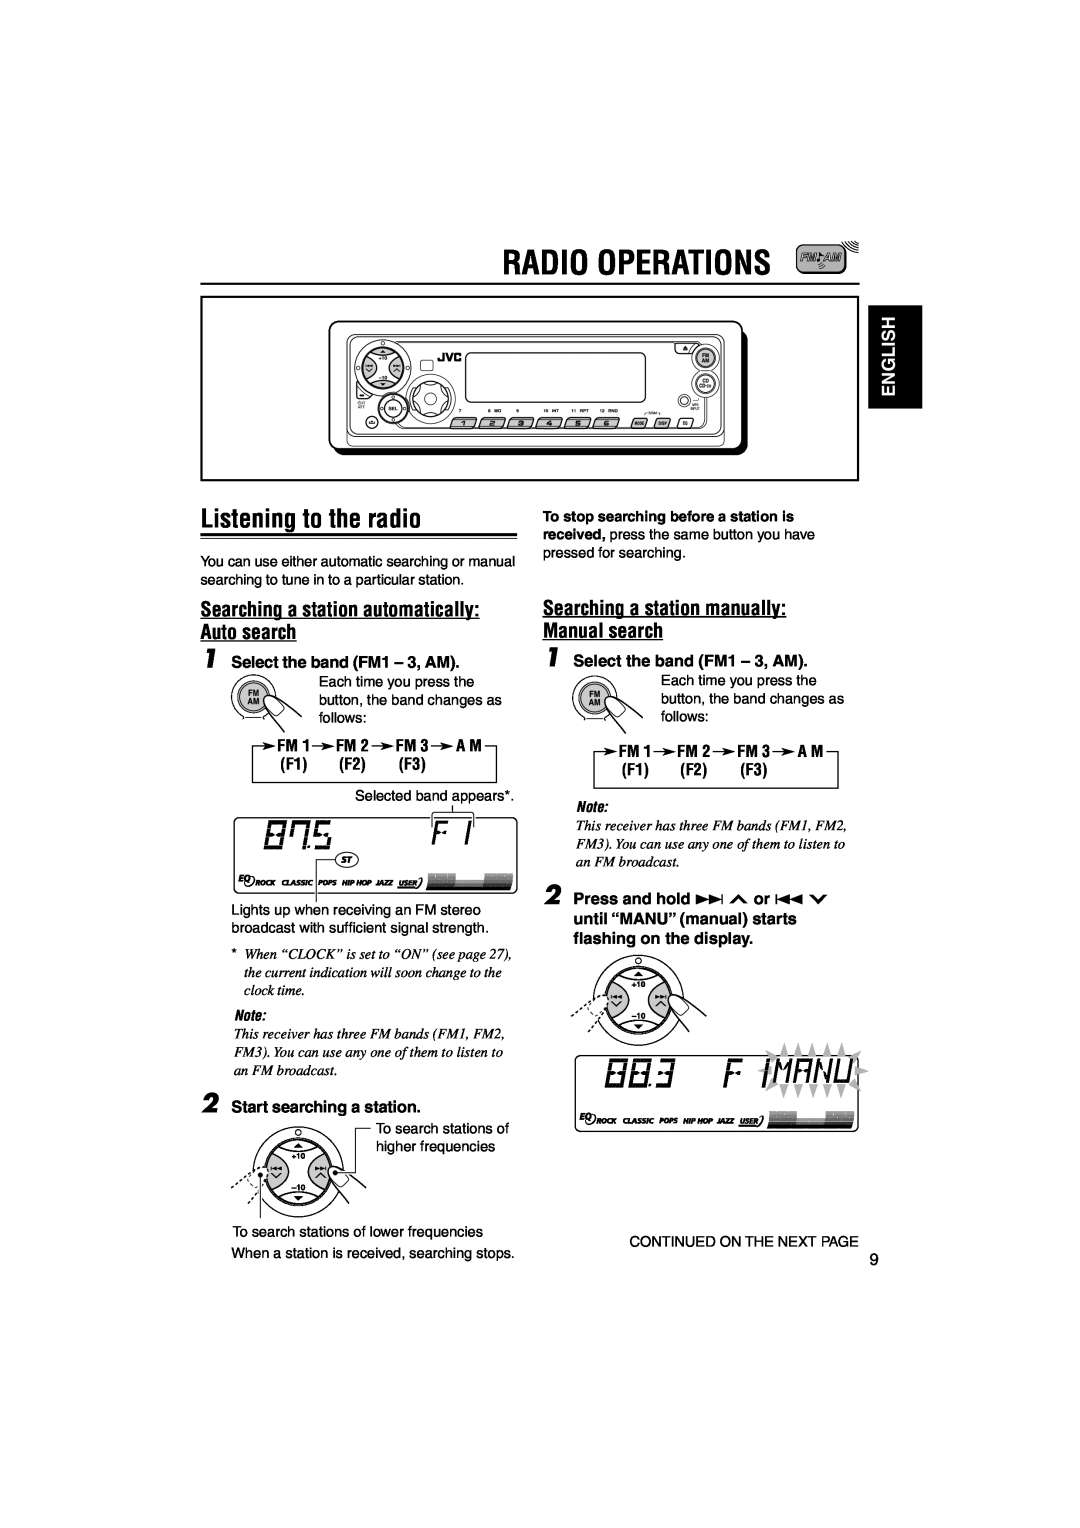 JVC KD-SX990 Radio Operations, Listening to the radio, Searching a station automatically Auto search, English, FM 3 A M 